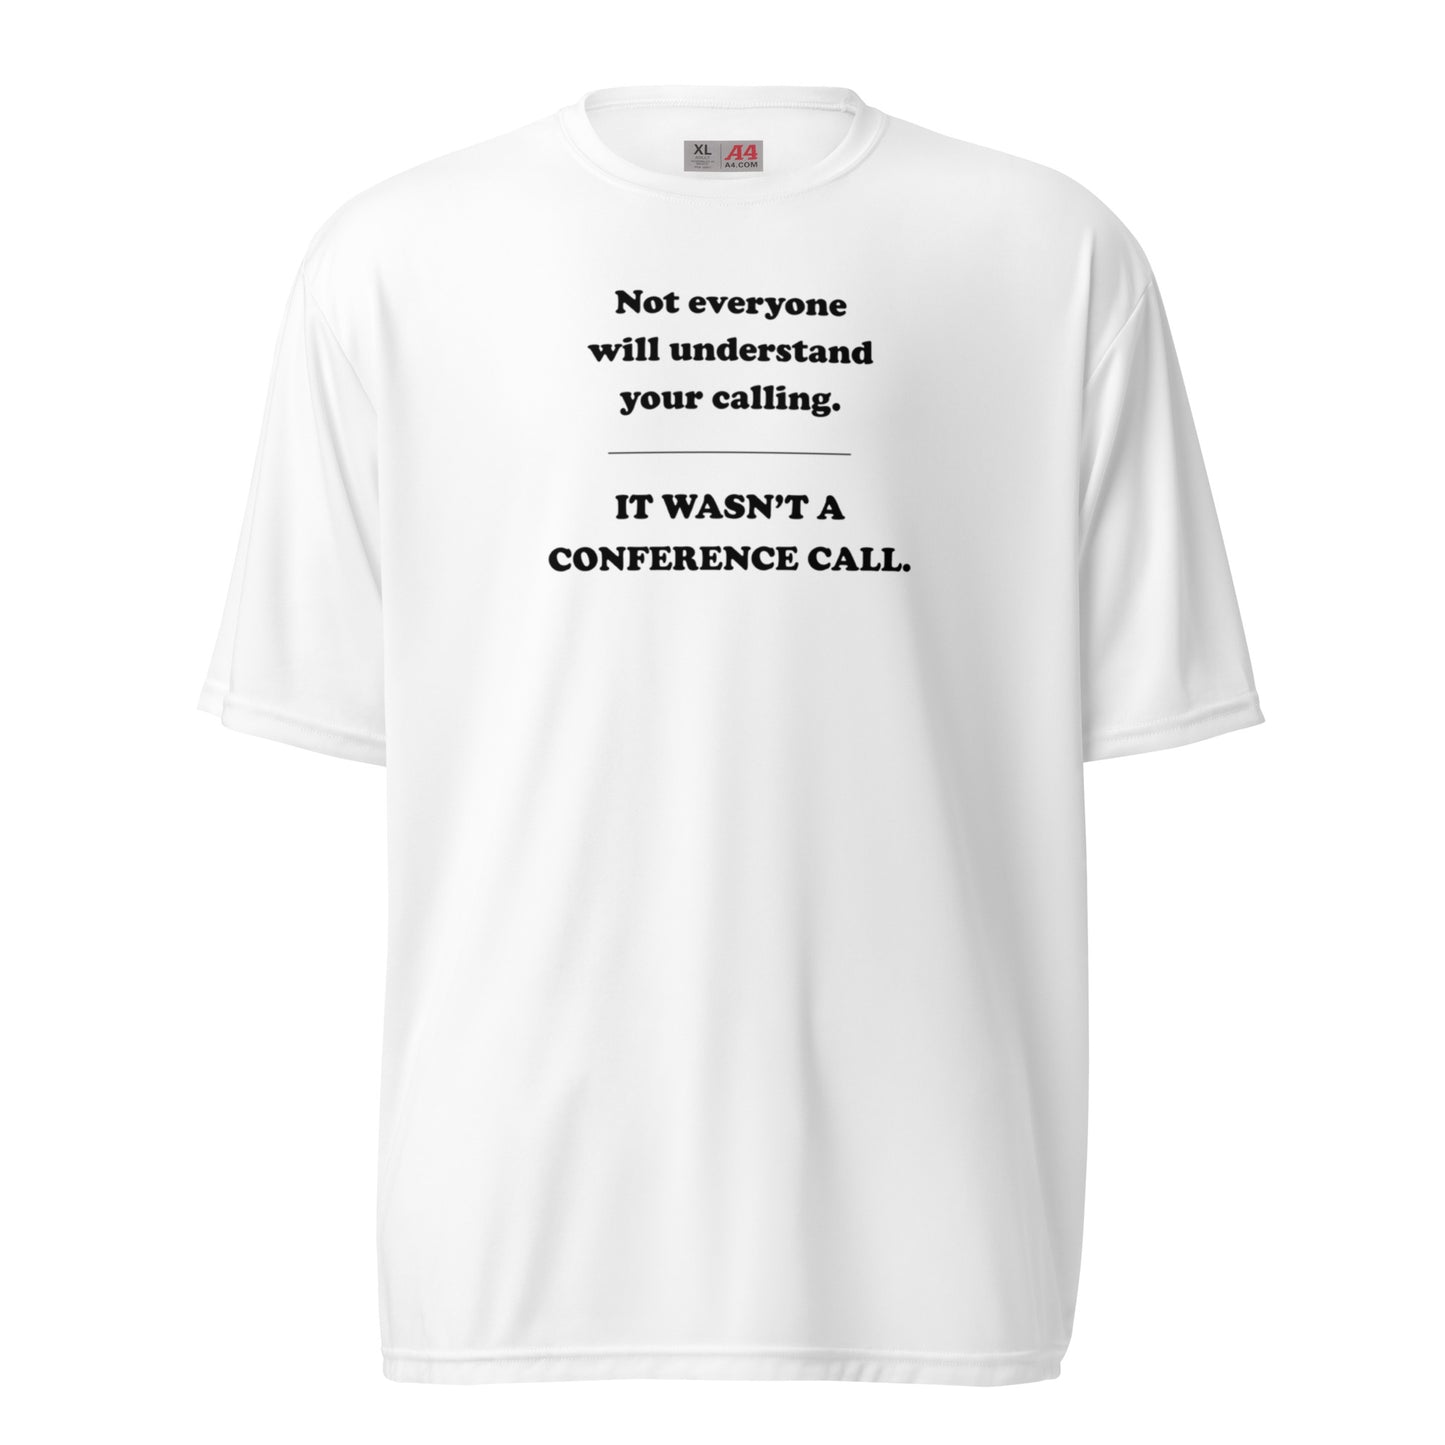 Not Everyone Will Understand Your Calling unisex performance crew neck t-shirt - Black Print